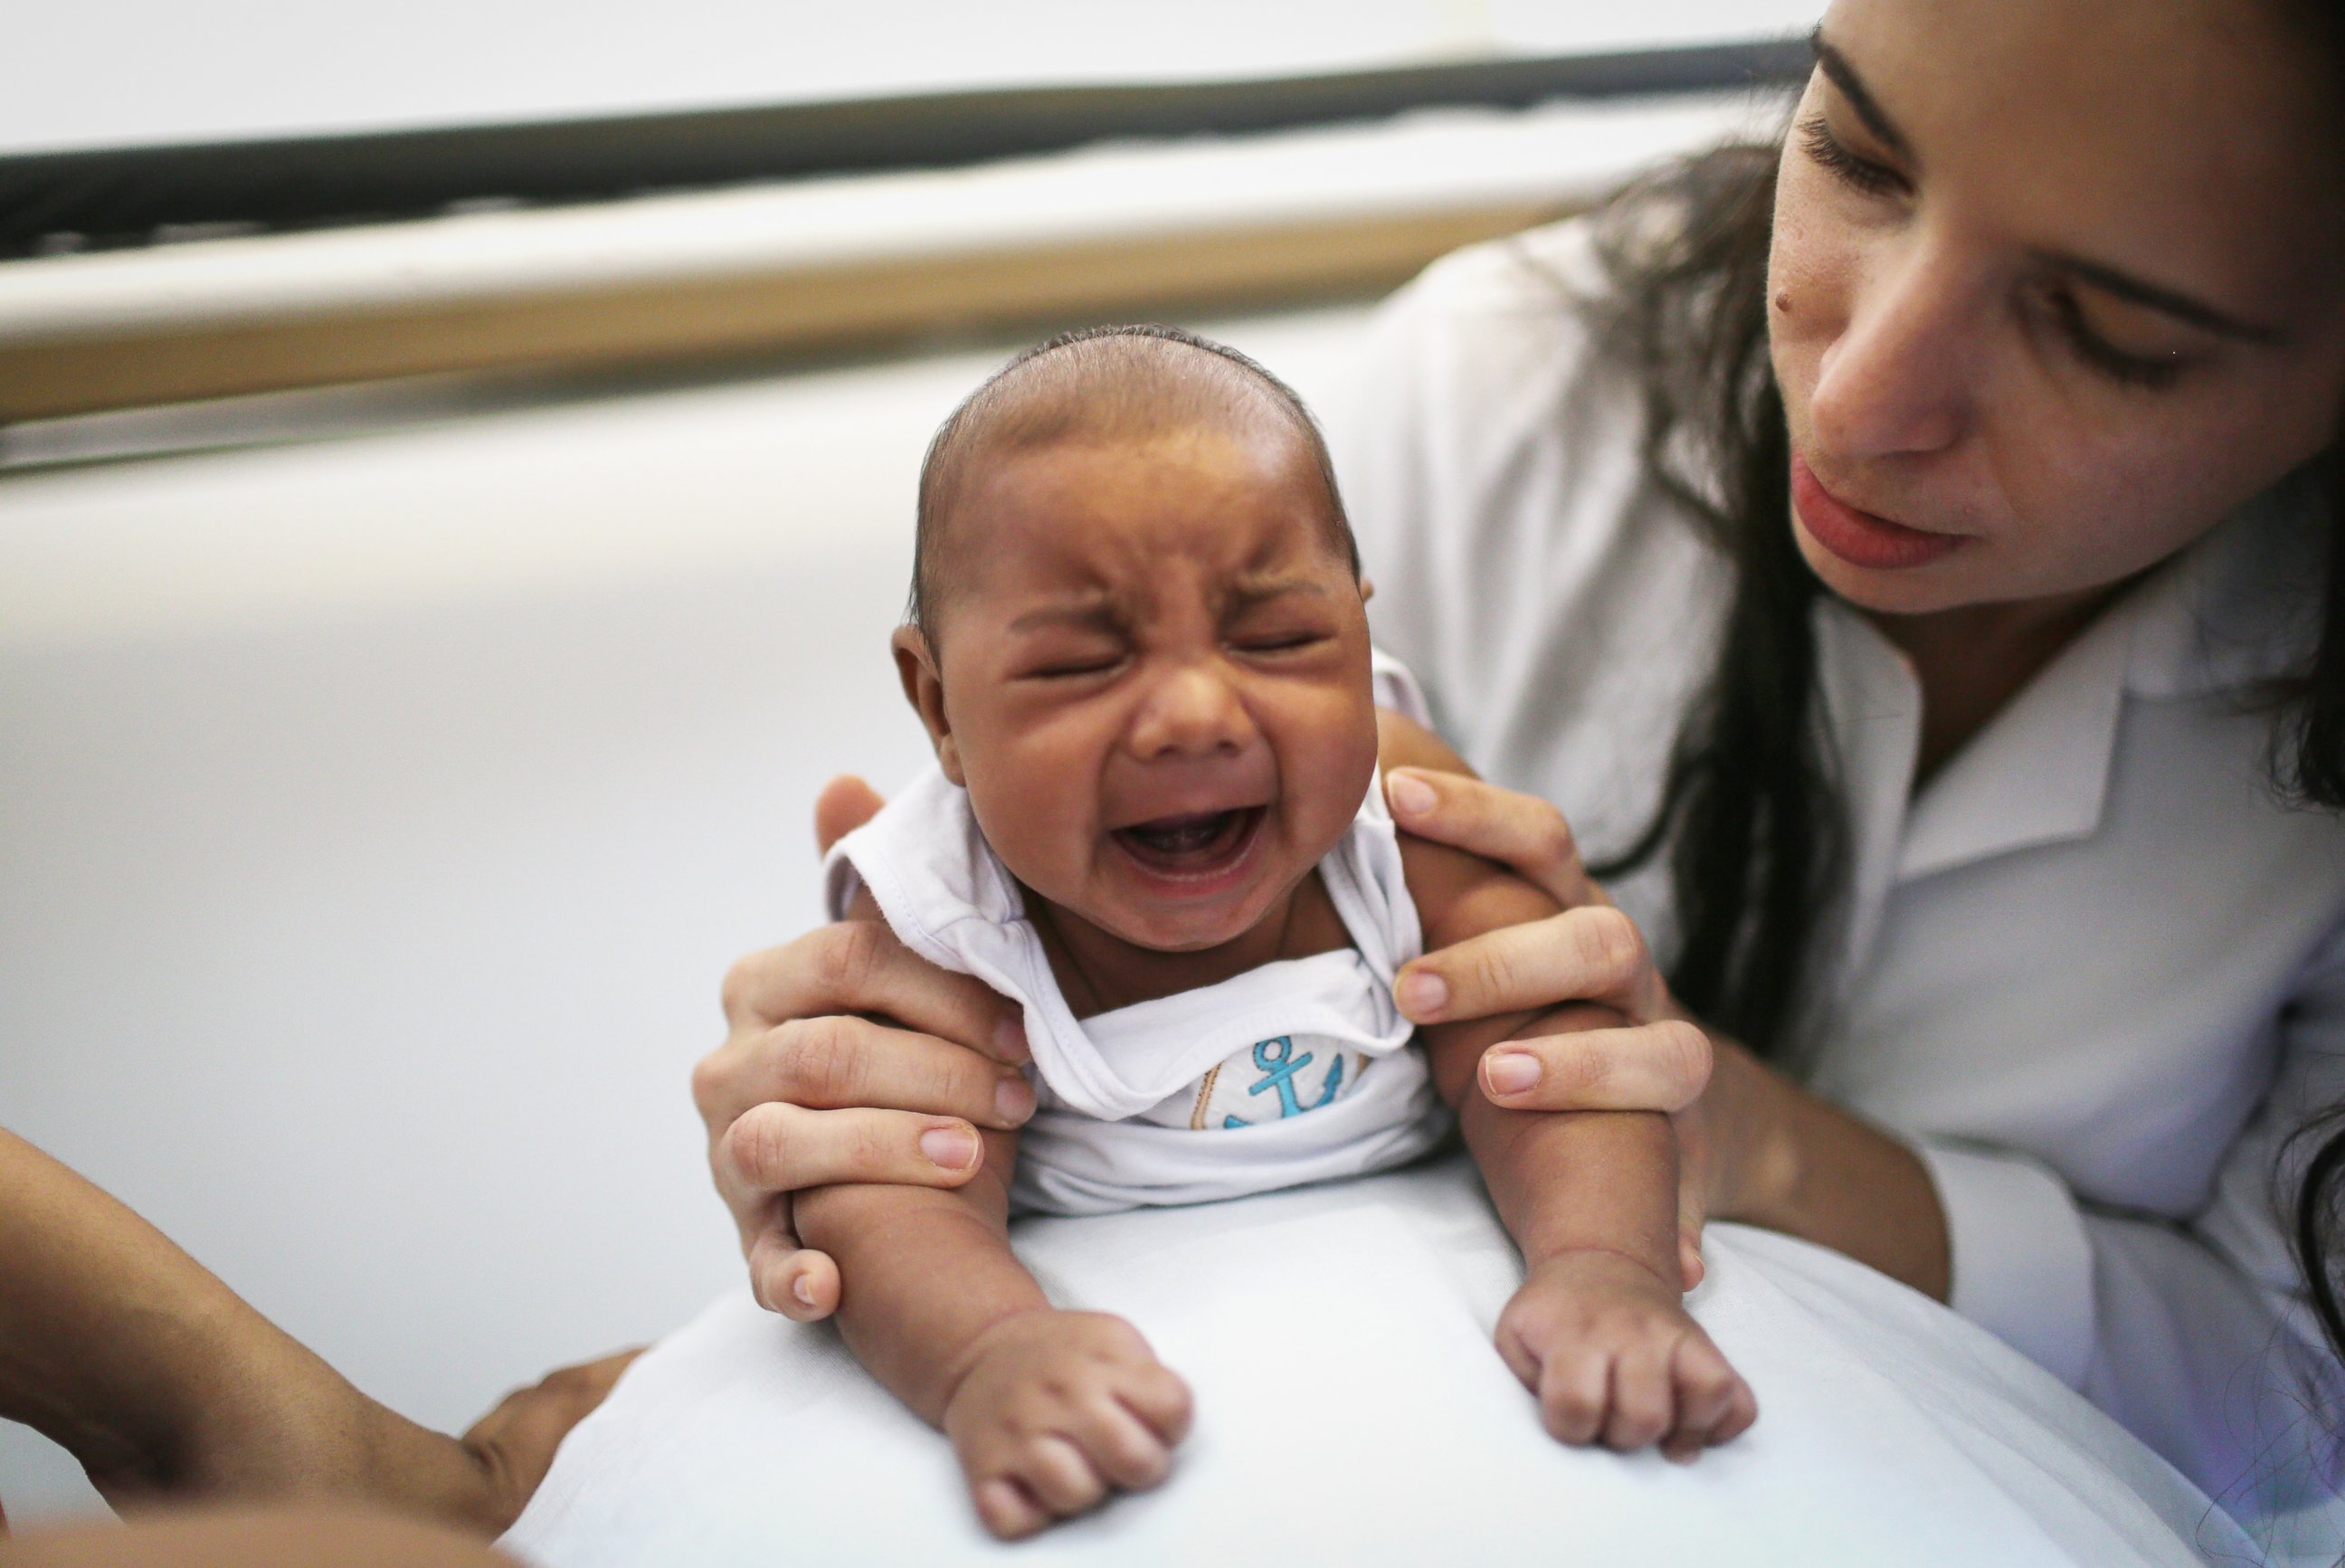 PHOTO: Dr. Valeria Barros treats a 6-week old baby born with microcephaly at the Lessa de Andrade polyclinic during a physical therapy session, Jan. 29, 2016 in Recife, Brazil.